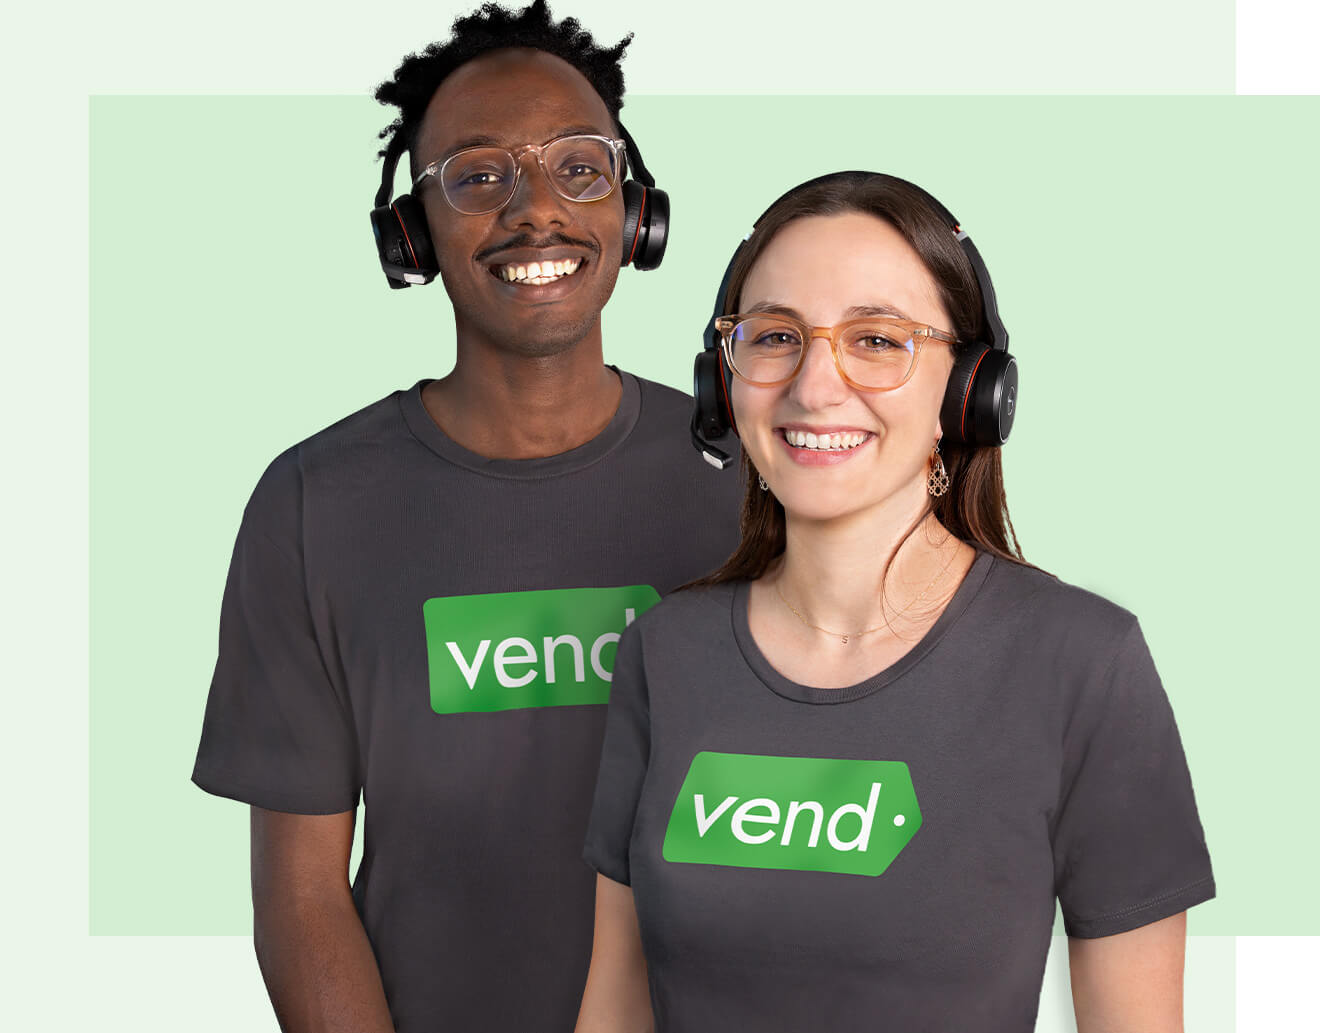 Why Vend support